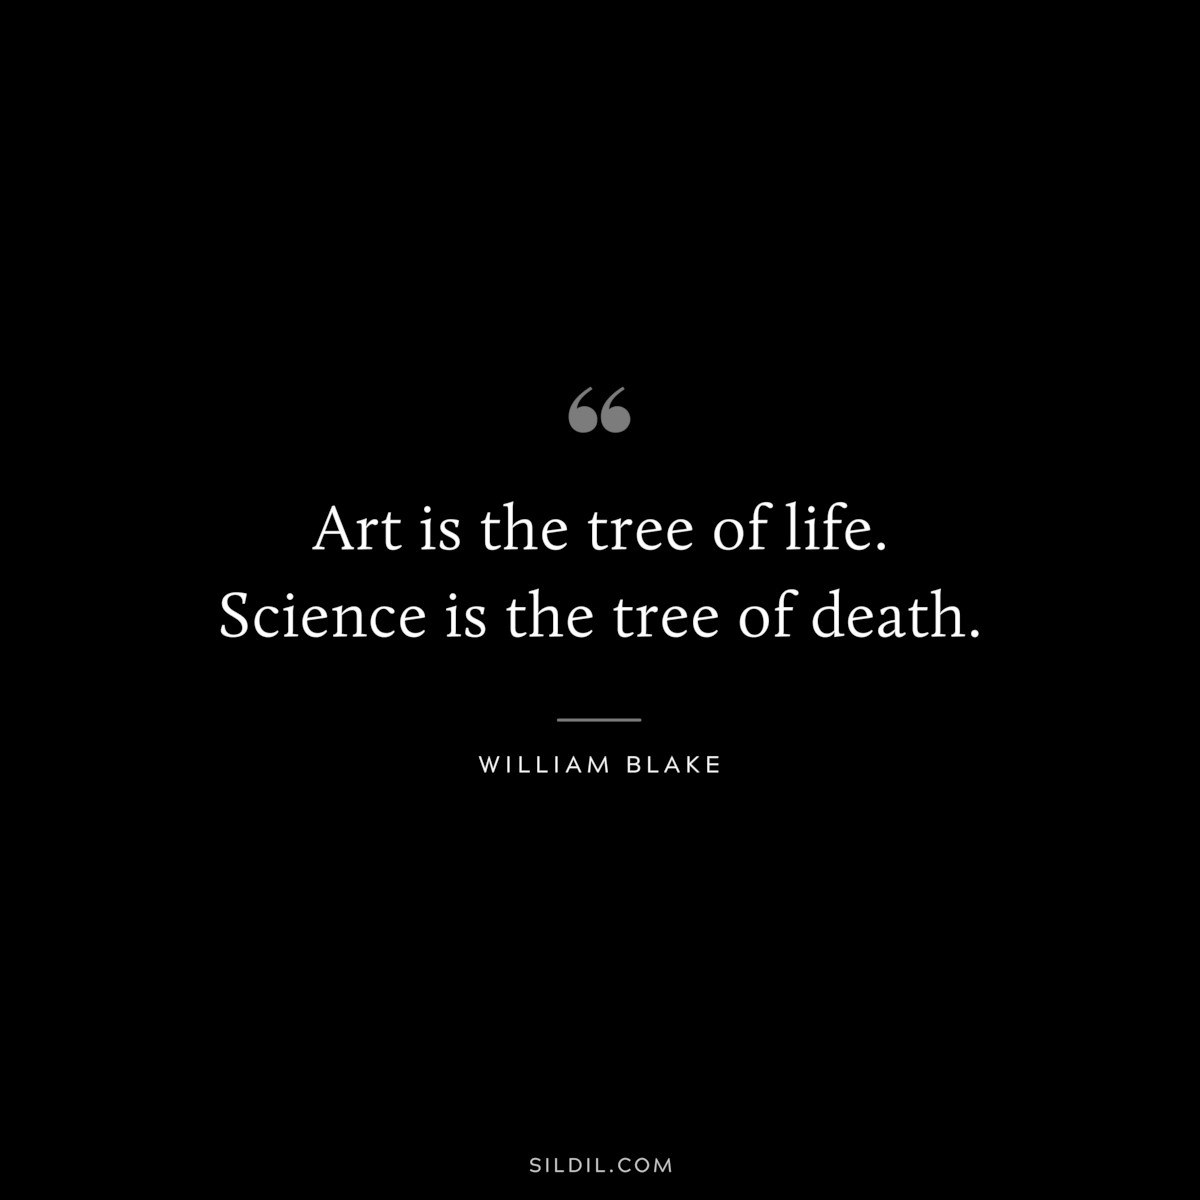 Art is the tree of life. Science is the tree of death. ― William Blake